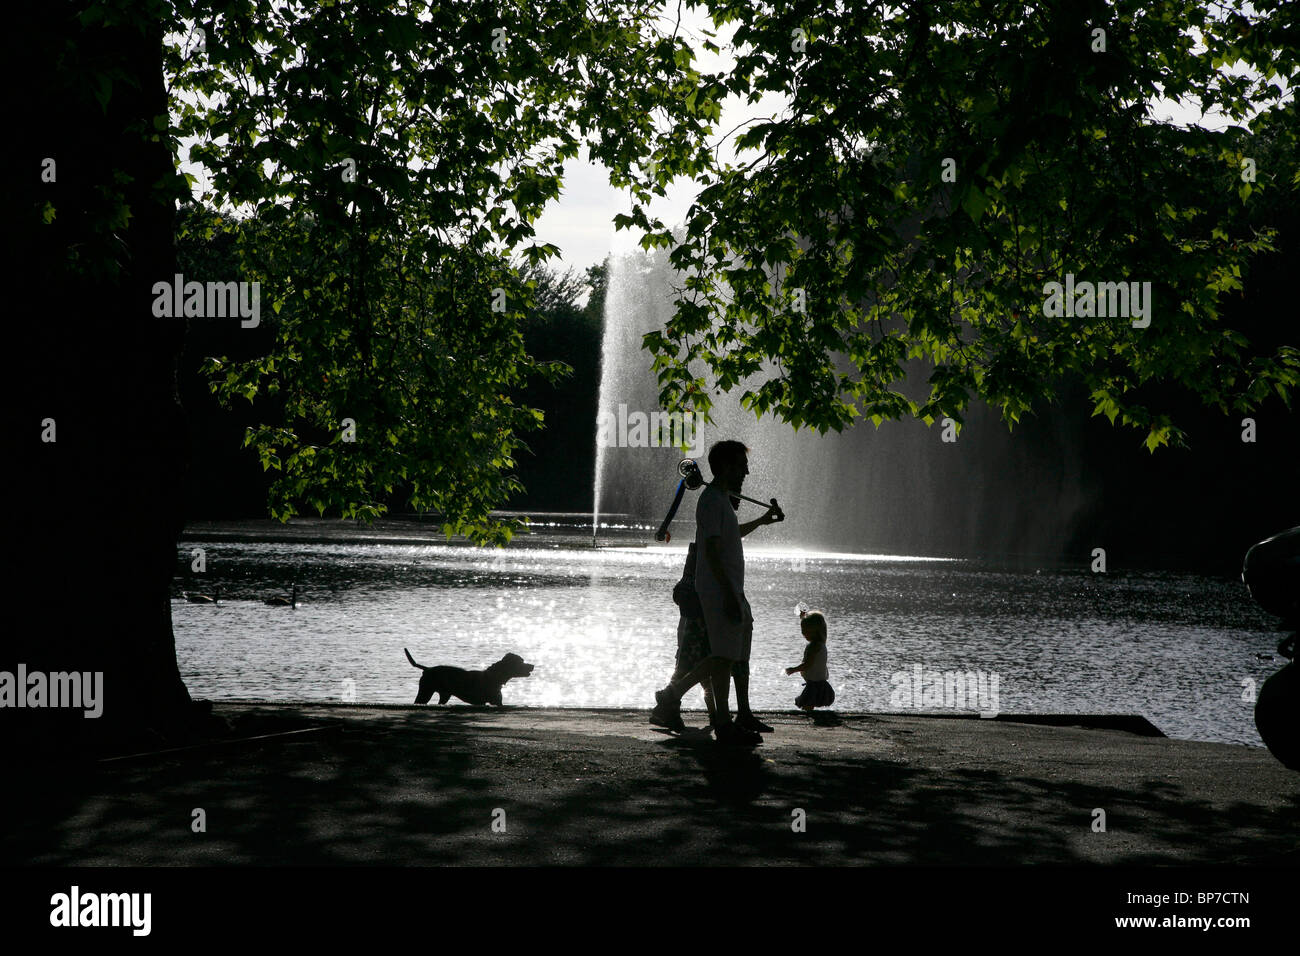 Sunseekers enjoying heatwave conditions by the lake in Victoria Park, Bethnal Green, London, UK Stock Photo